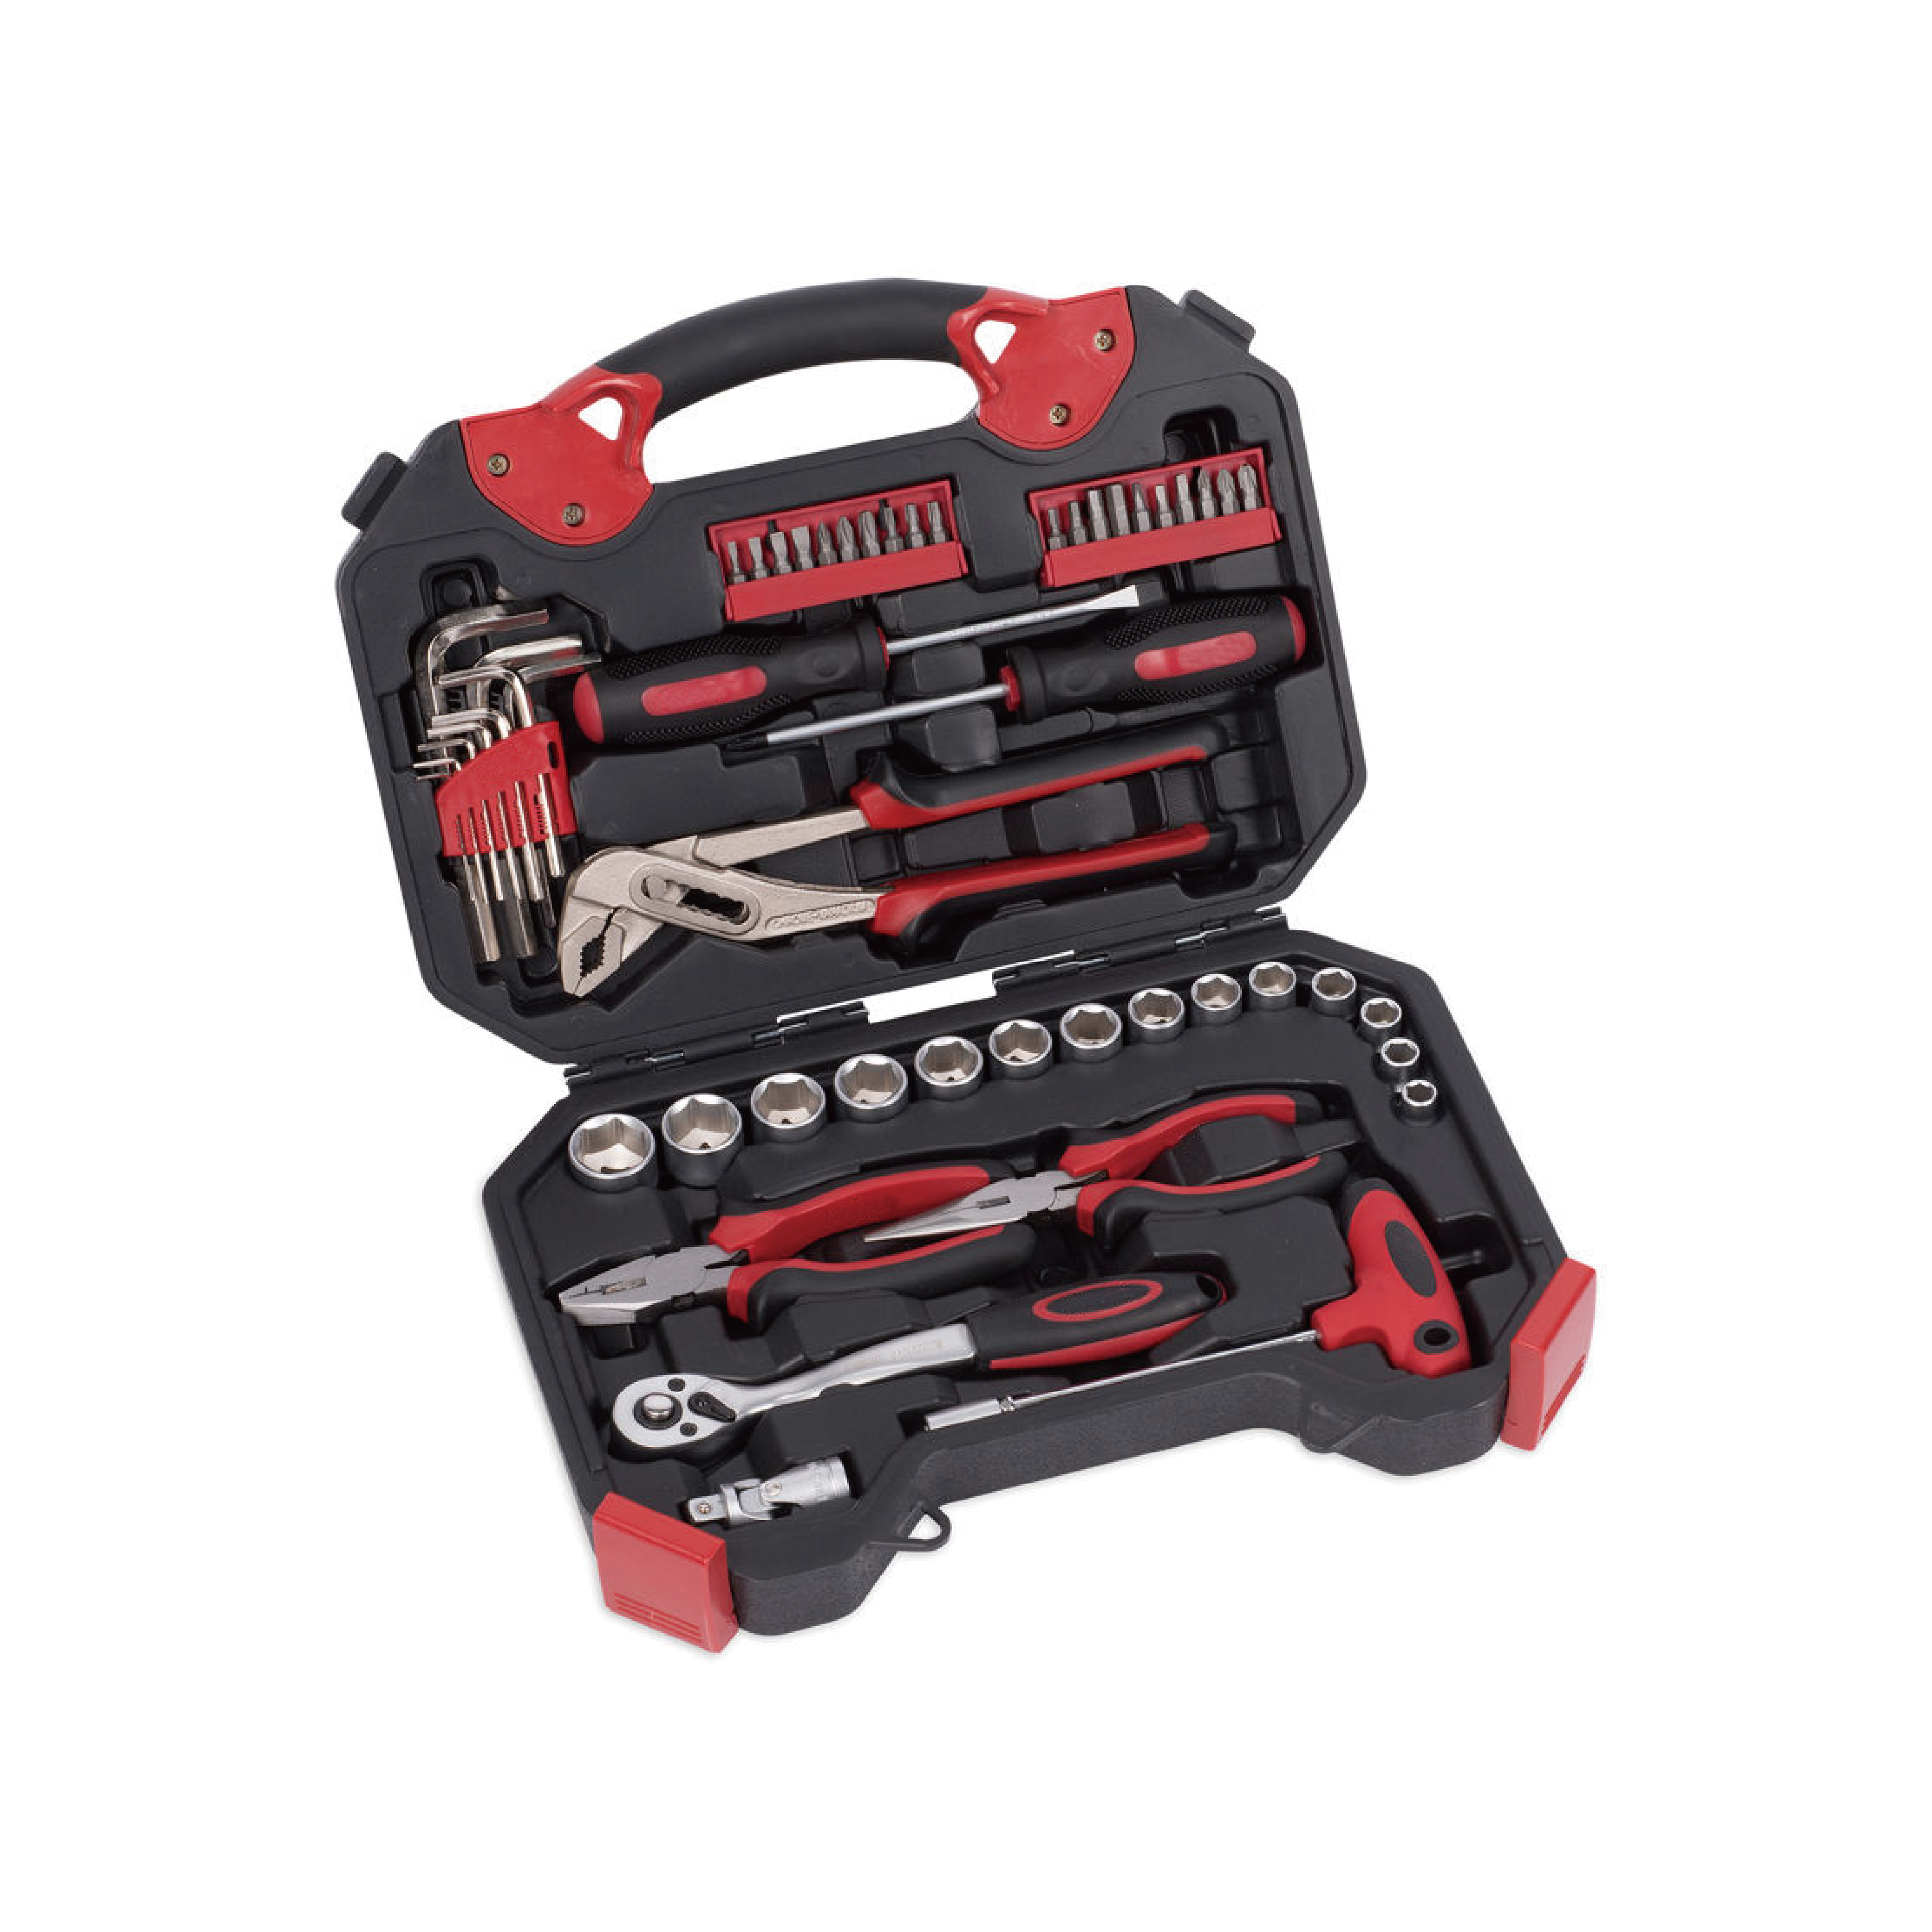 2022 High quality Auto Tool Box - 52PCS Tool Set in Blow Case all Carbon Steel – MACHINERY TOOLS